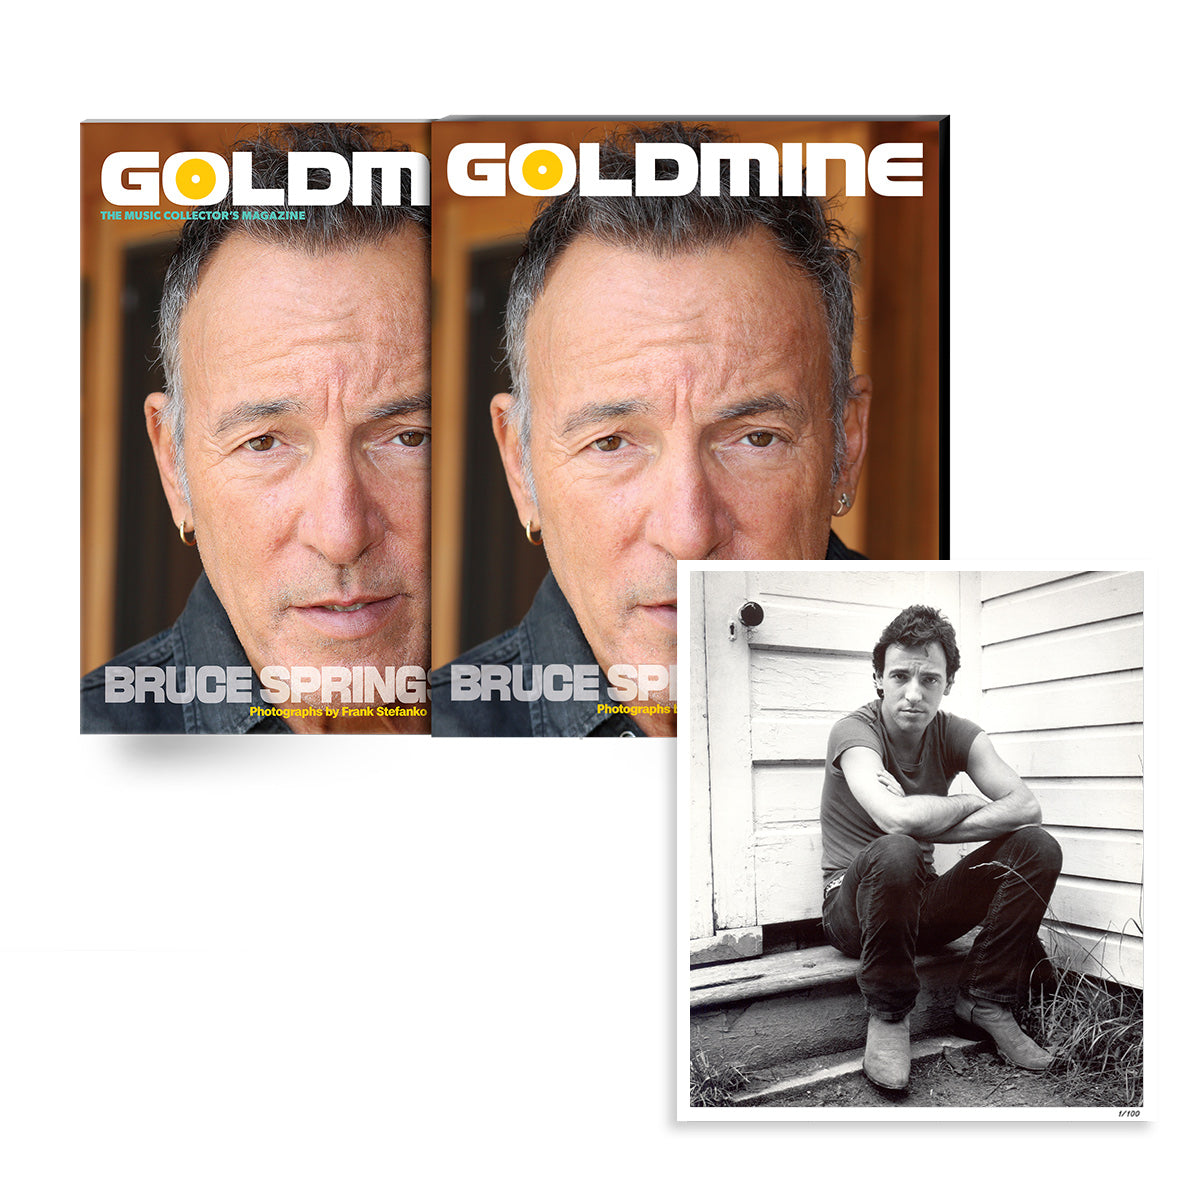 GOLDMINE MAGAZINE: WINTER 2023 ISSUE FEATURING BRUCE SPRINGSTEEN / FRANK STEFANKO – ALT COVER HAND-NUMBERED SLIPCASE + 8"x10" PHOTO PRINT